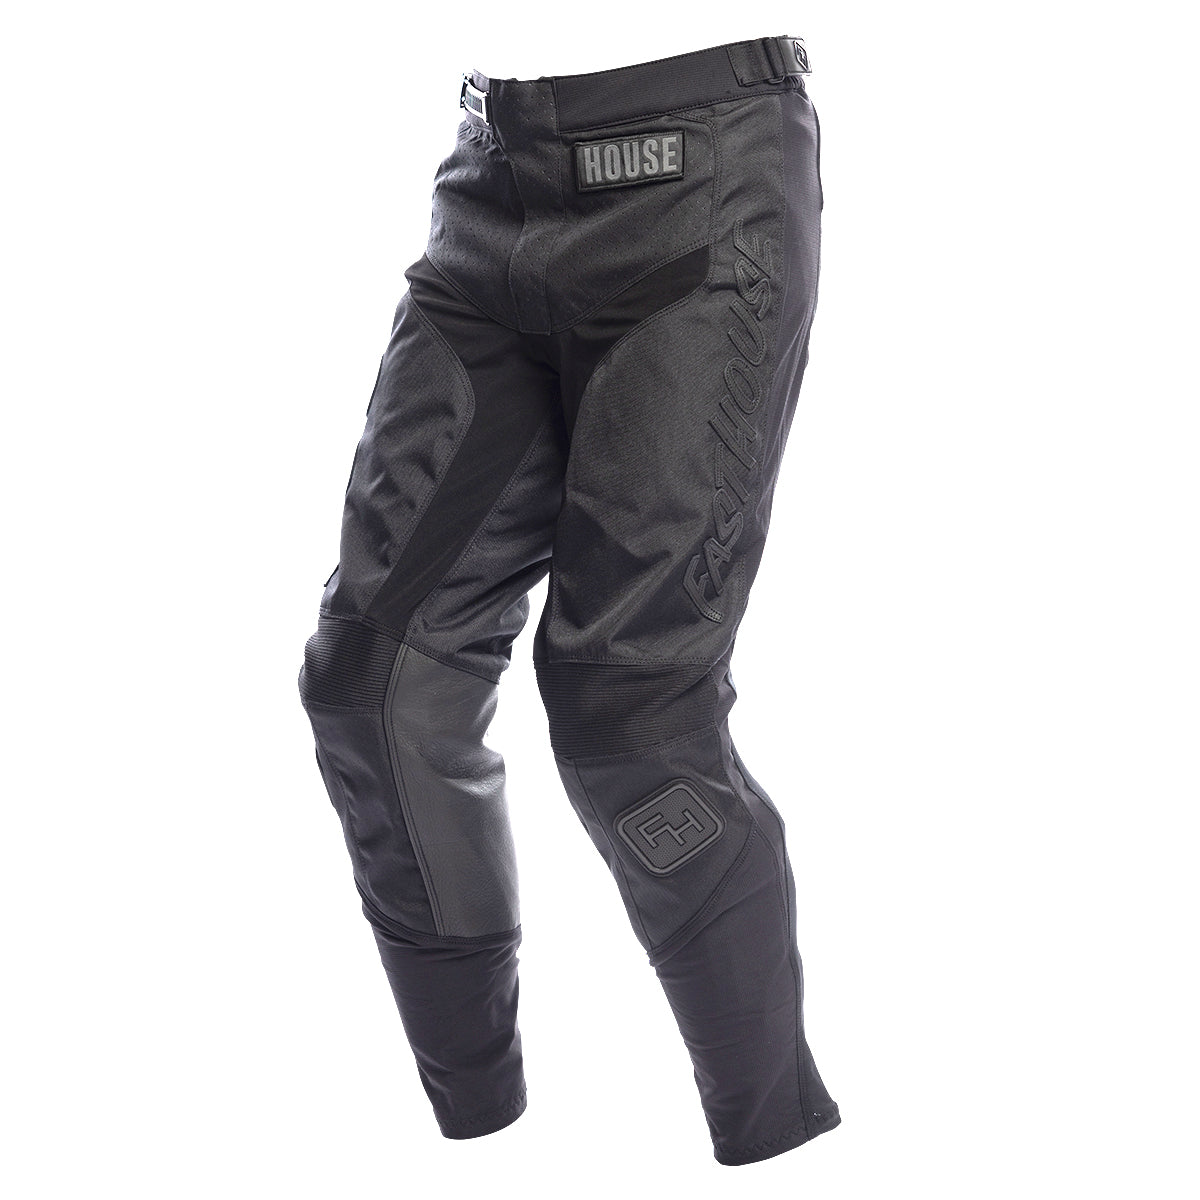 Fasthouse 805 Grindhouse Newhall Pant - Black